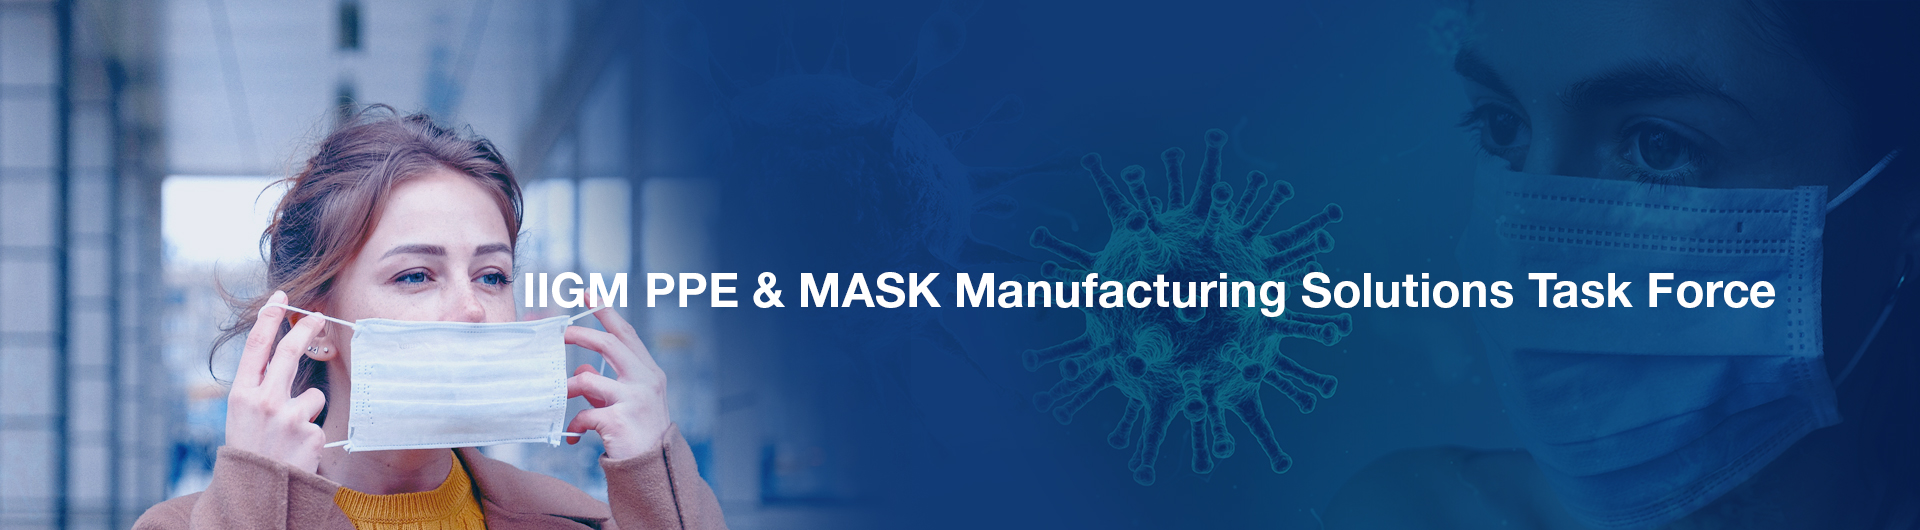 Mask Manufacturing Solution